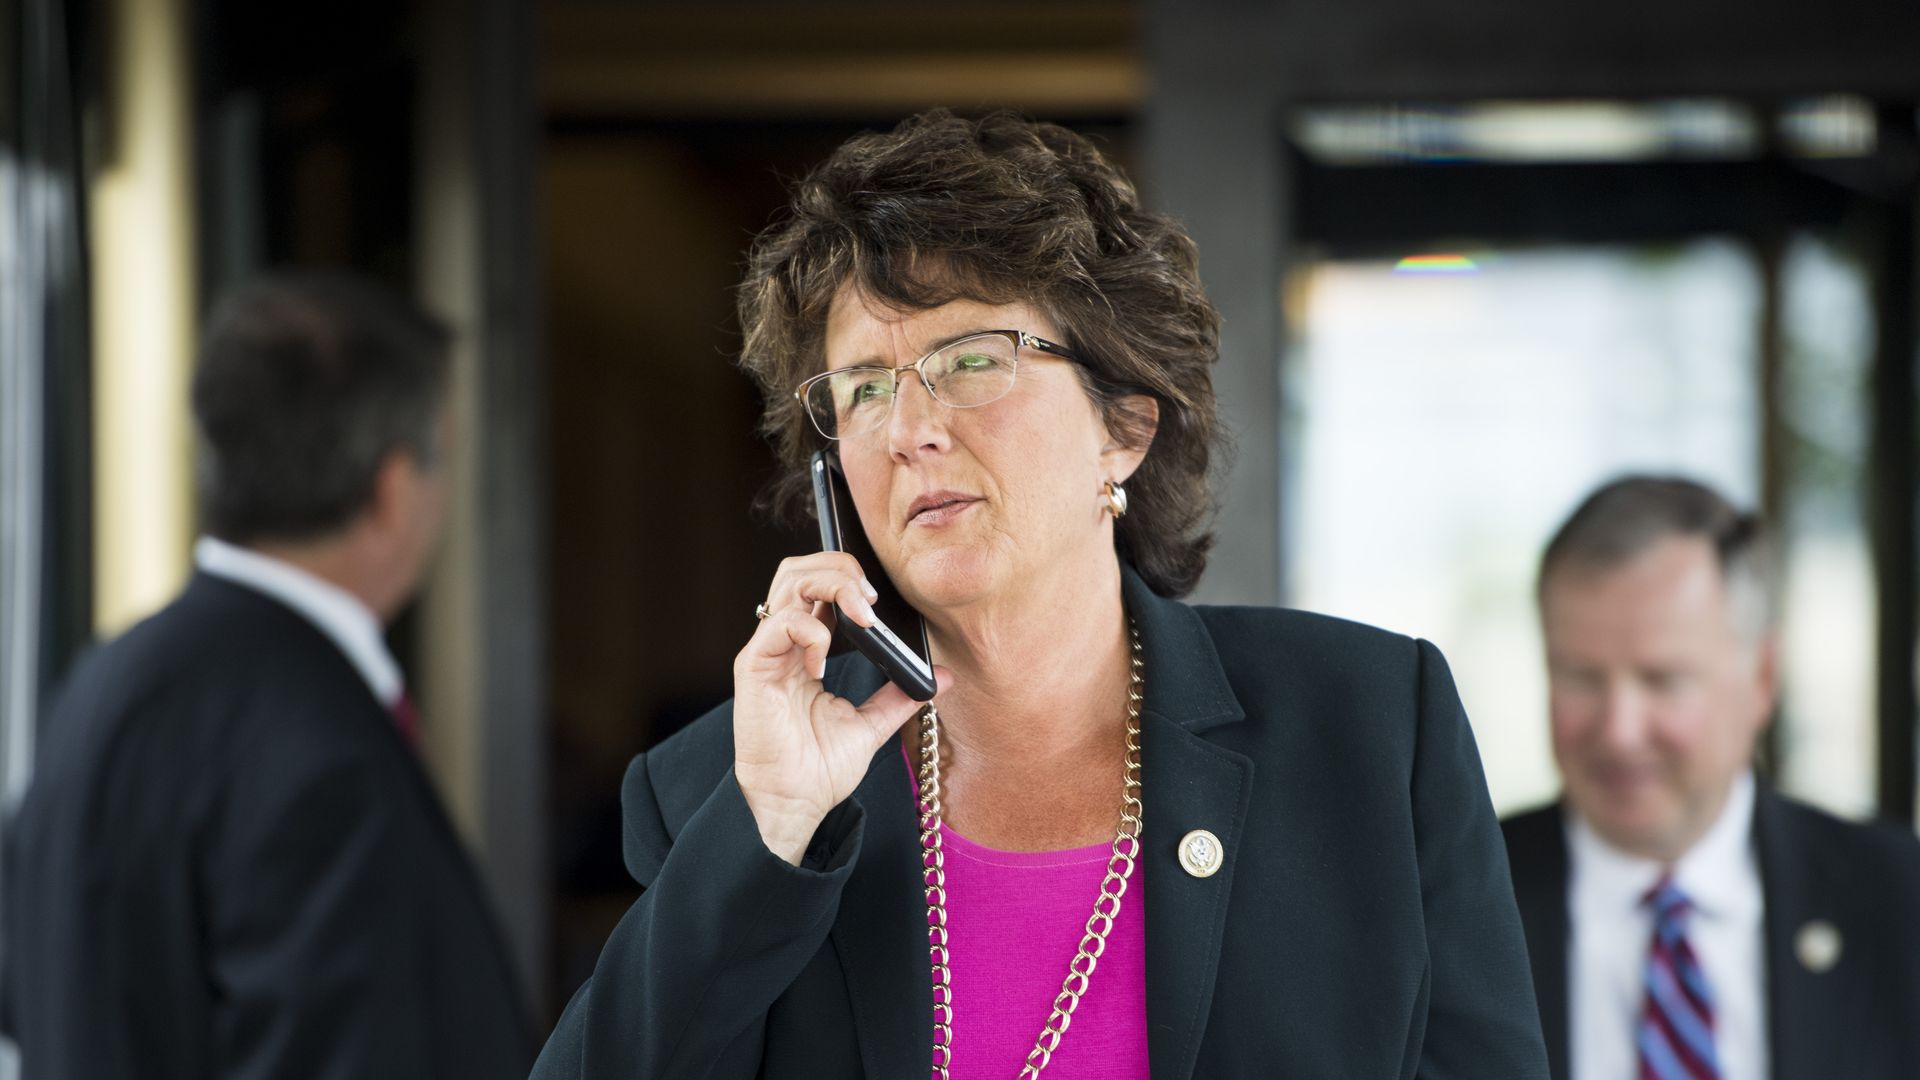 Photo of Jackie Walorski holding a phone to her ear outside a building entrance